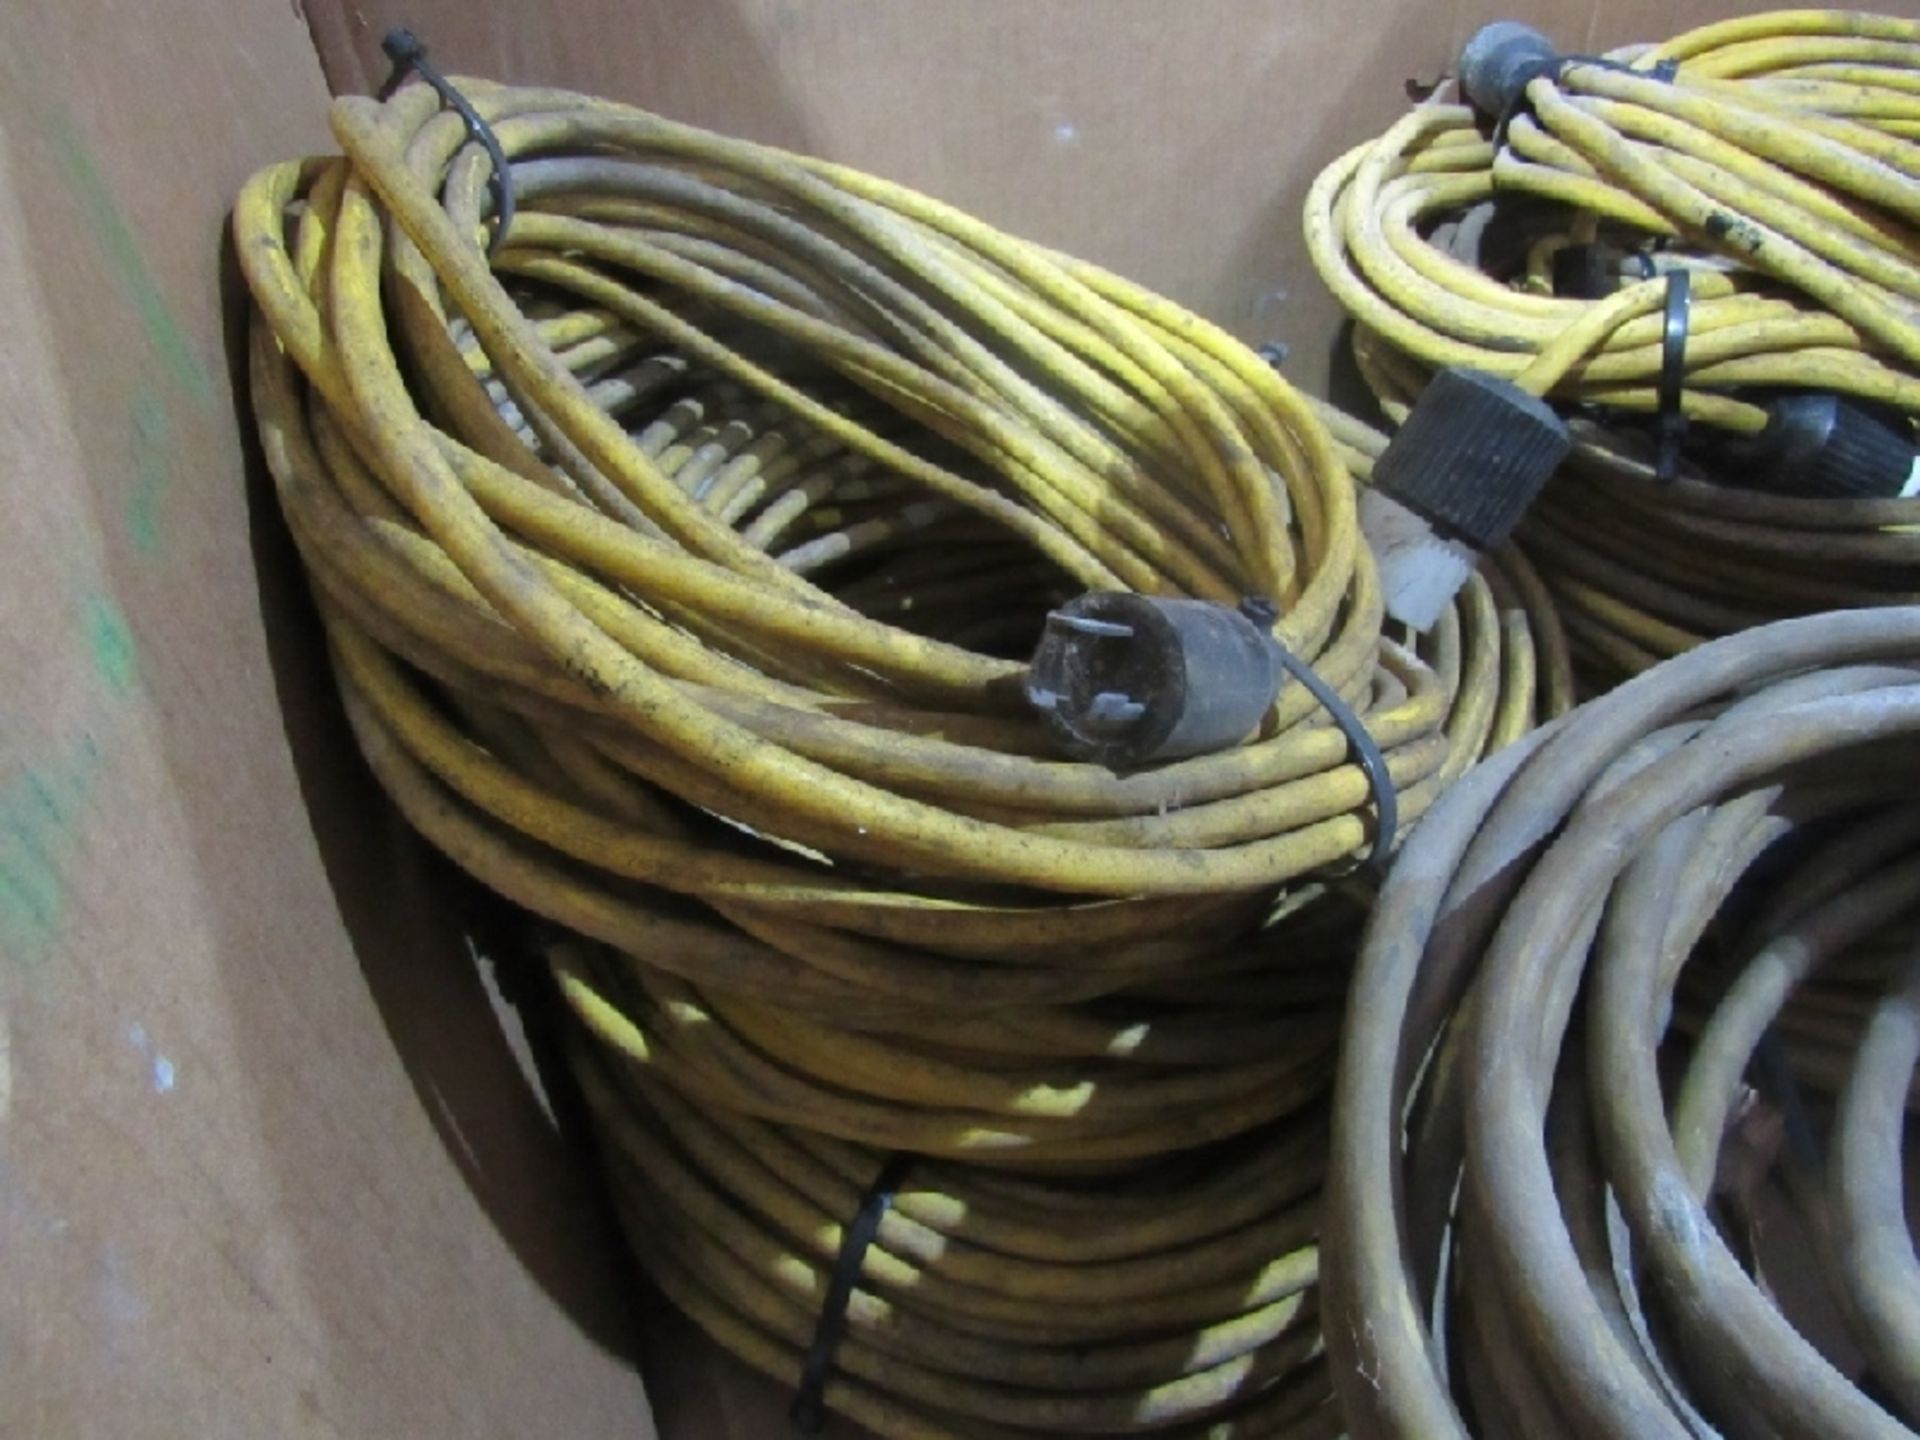 (qty - 25) Twist Lock Extension Cords- ***Located in Chattanooga, TN*** MFR - Unknown 10' to 20' - Image 6 of 8